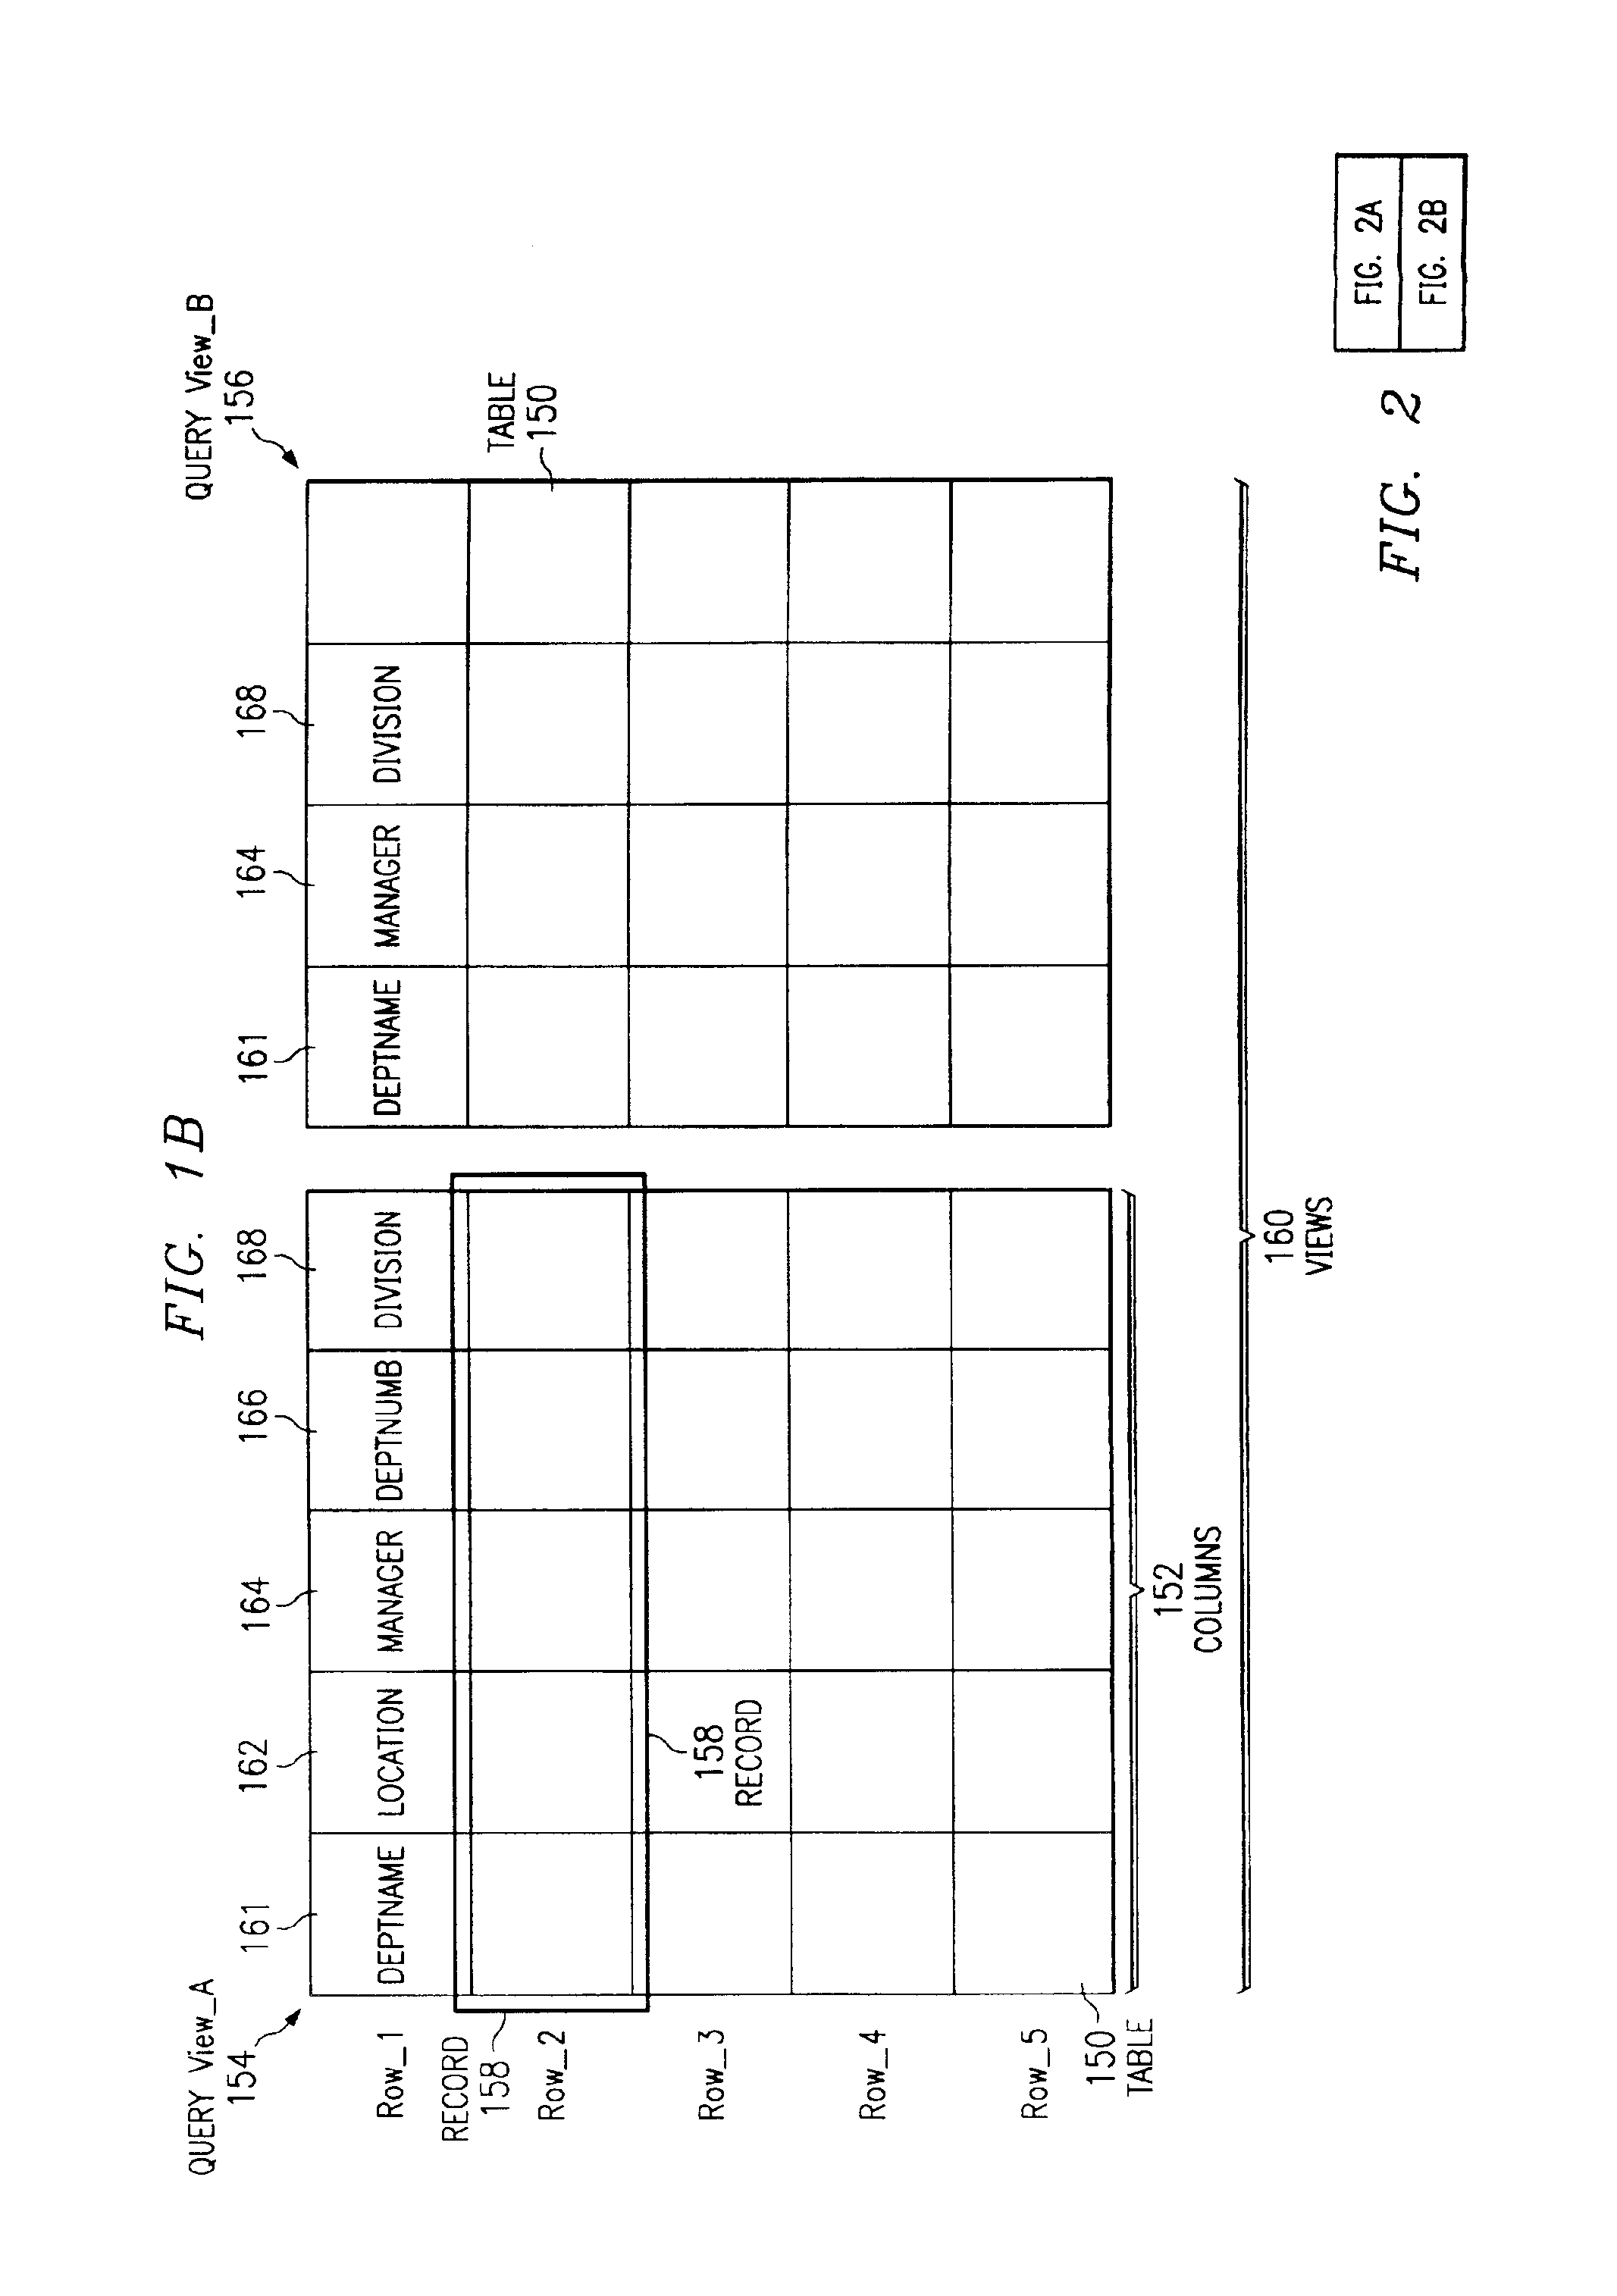 Systems, methods and computer program products to determine useful relationships and dimensions of a database